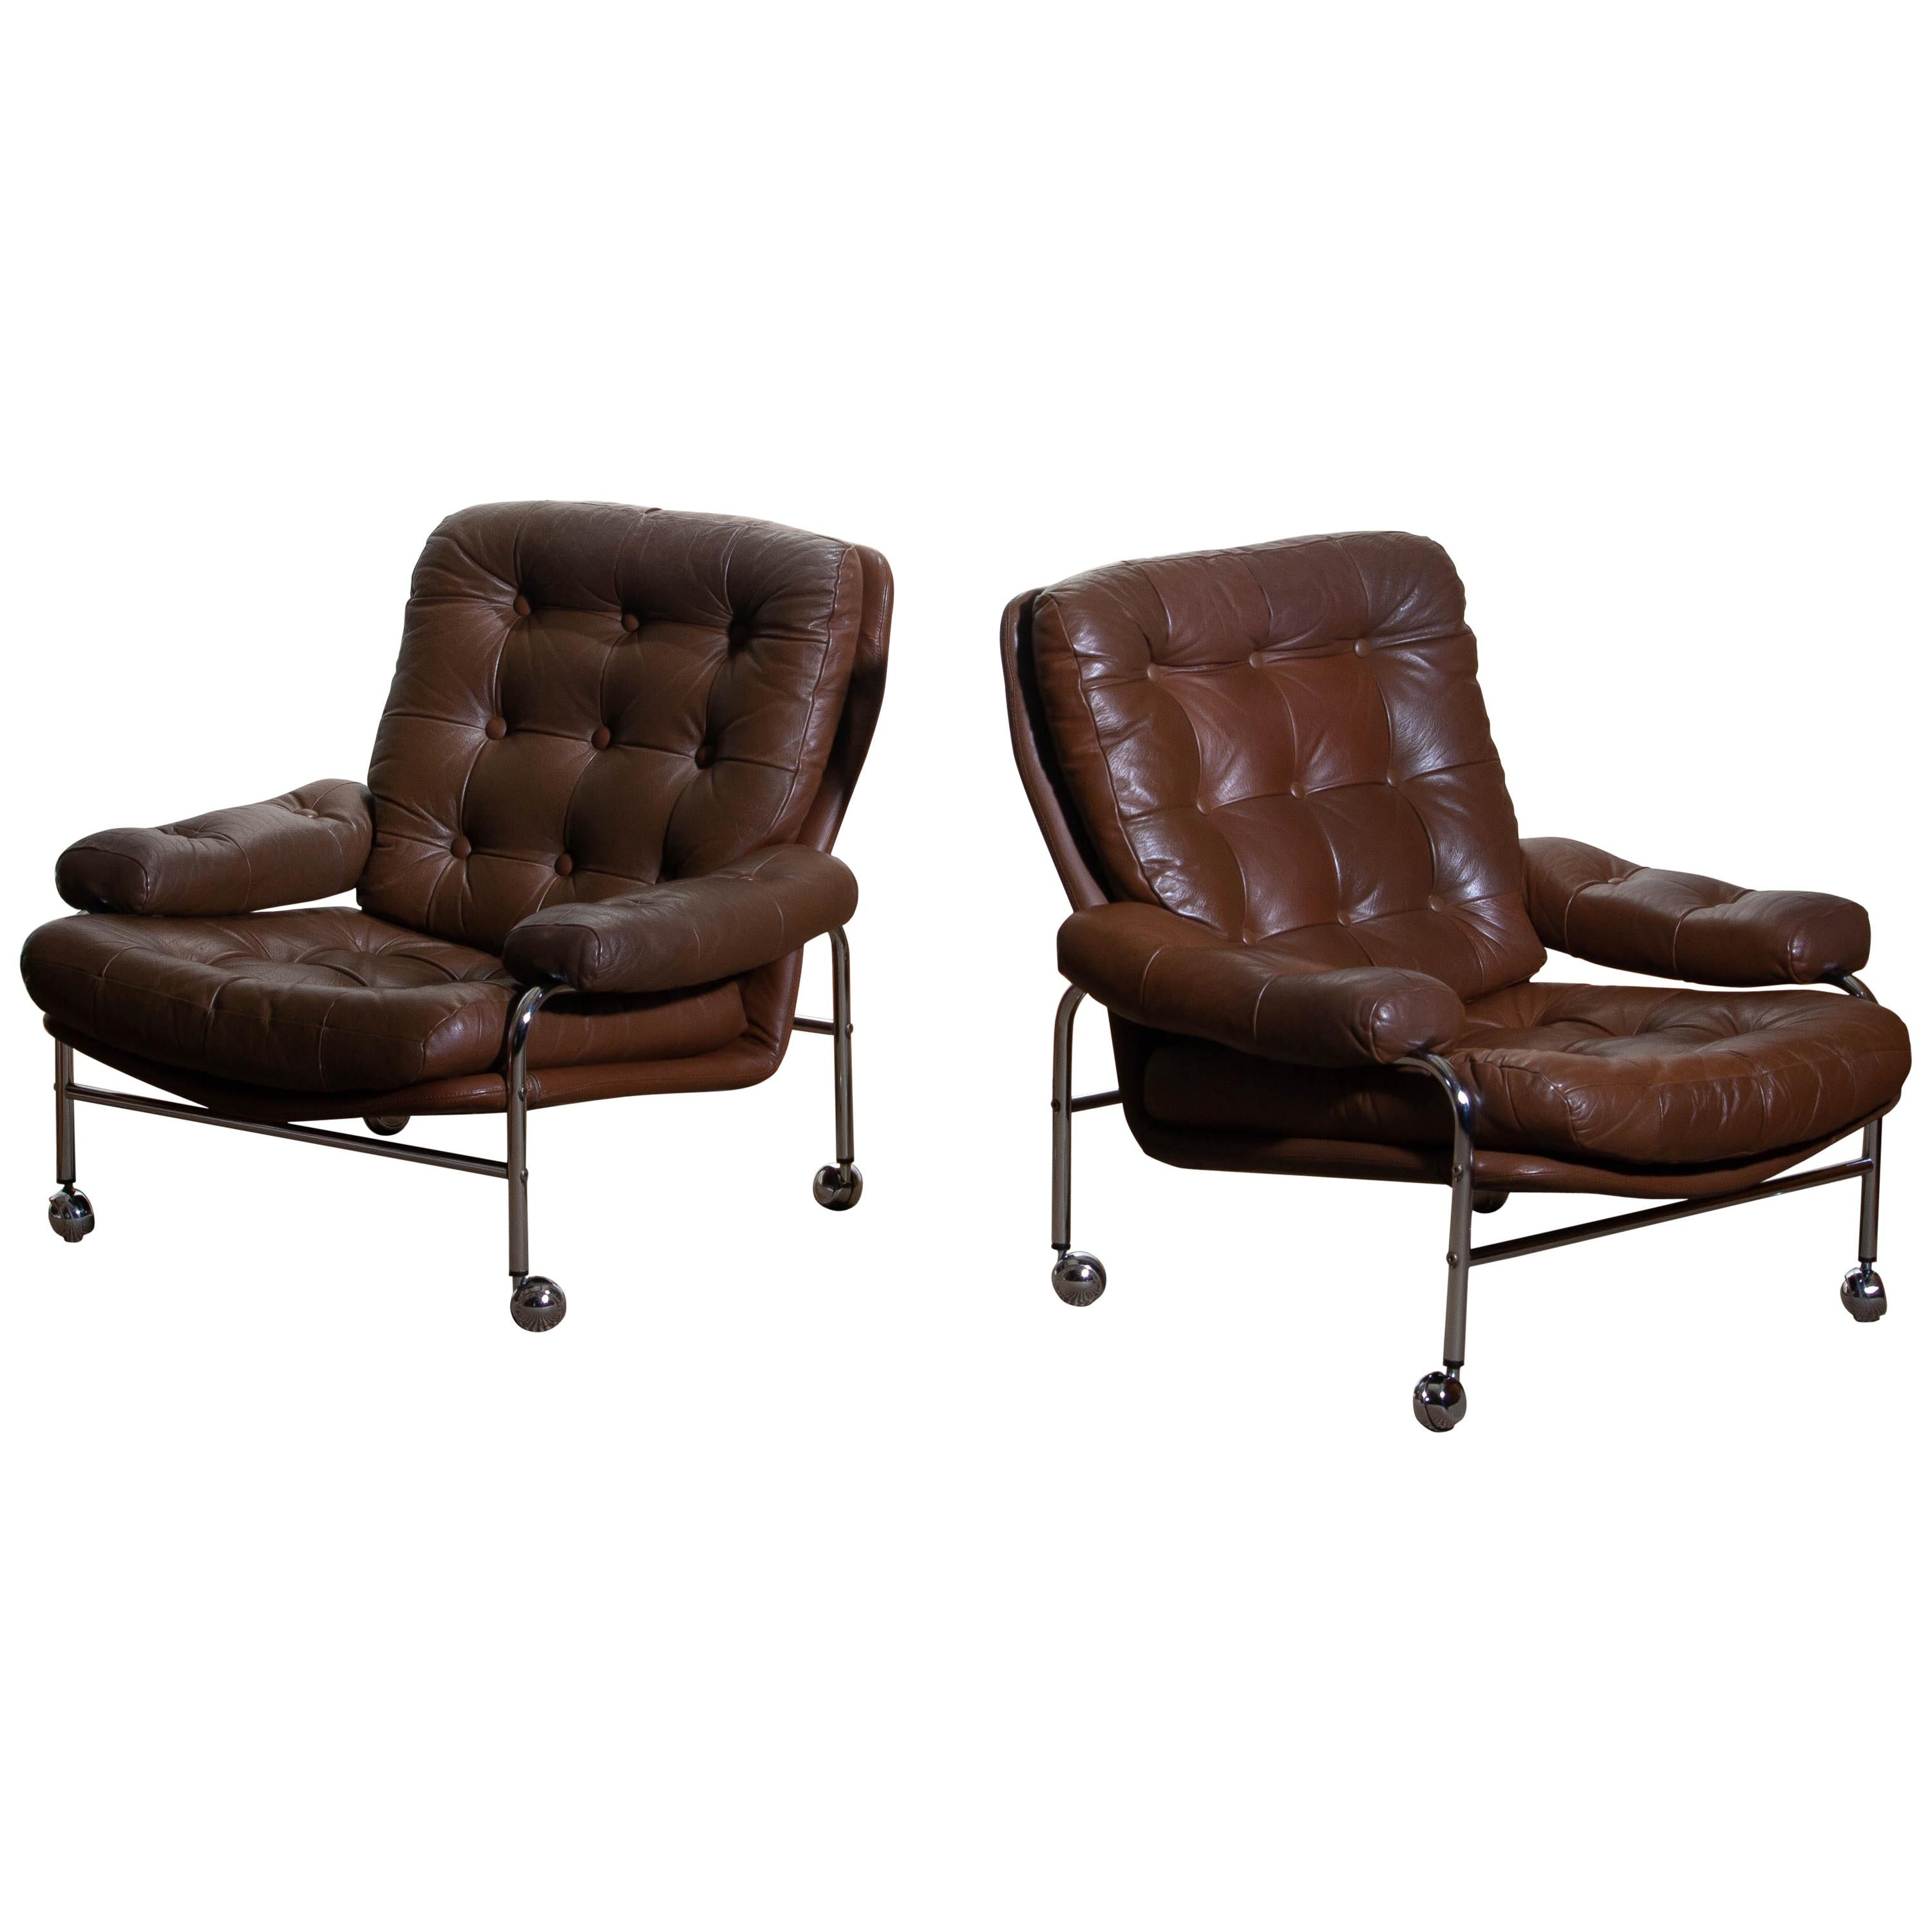 1970s, Chrome and Brown Leather Lounge Chairs by Scapa Rydaholm, Sweden 2